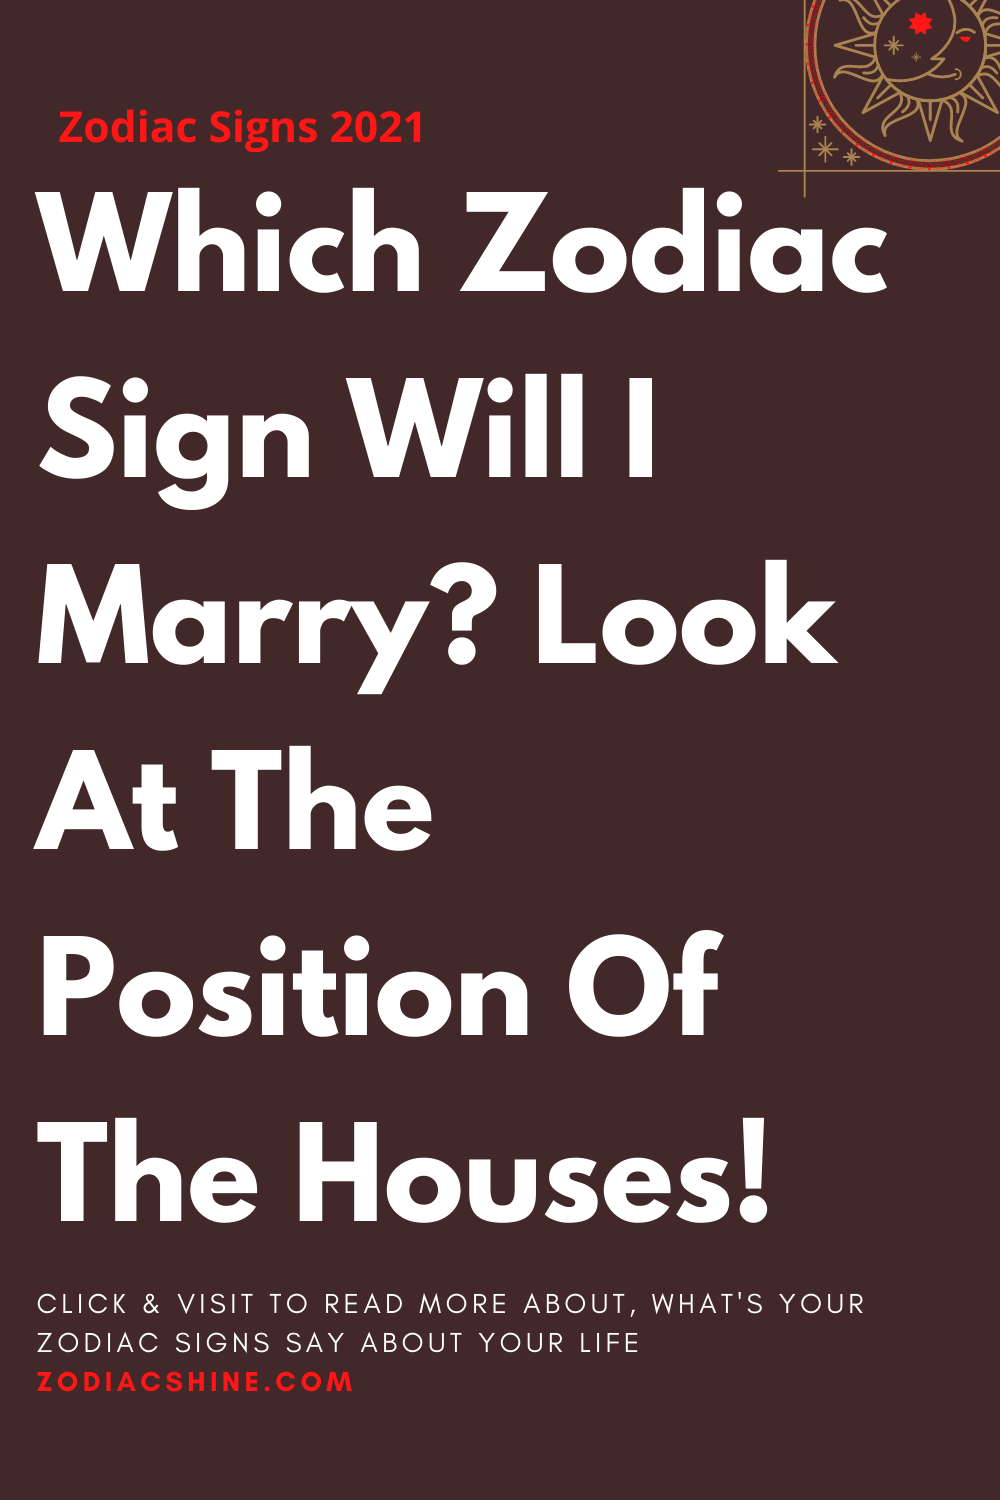 Which Zodiac Sign Will I Marry? Look At The Position Of The Houses!